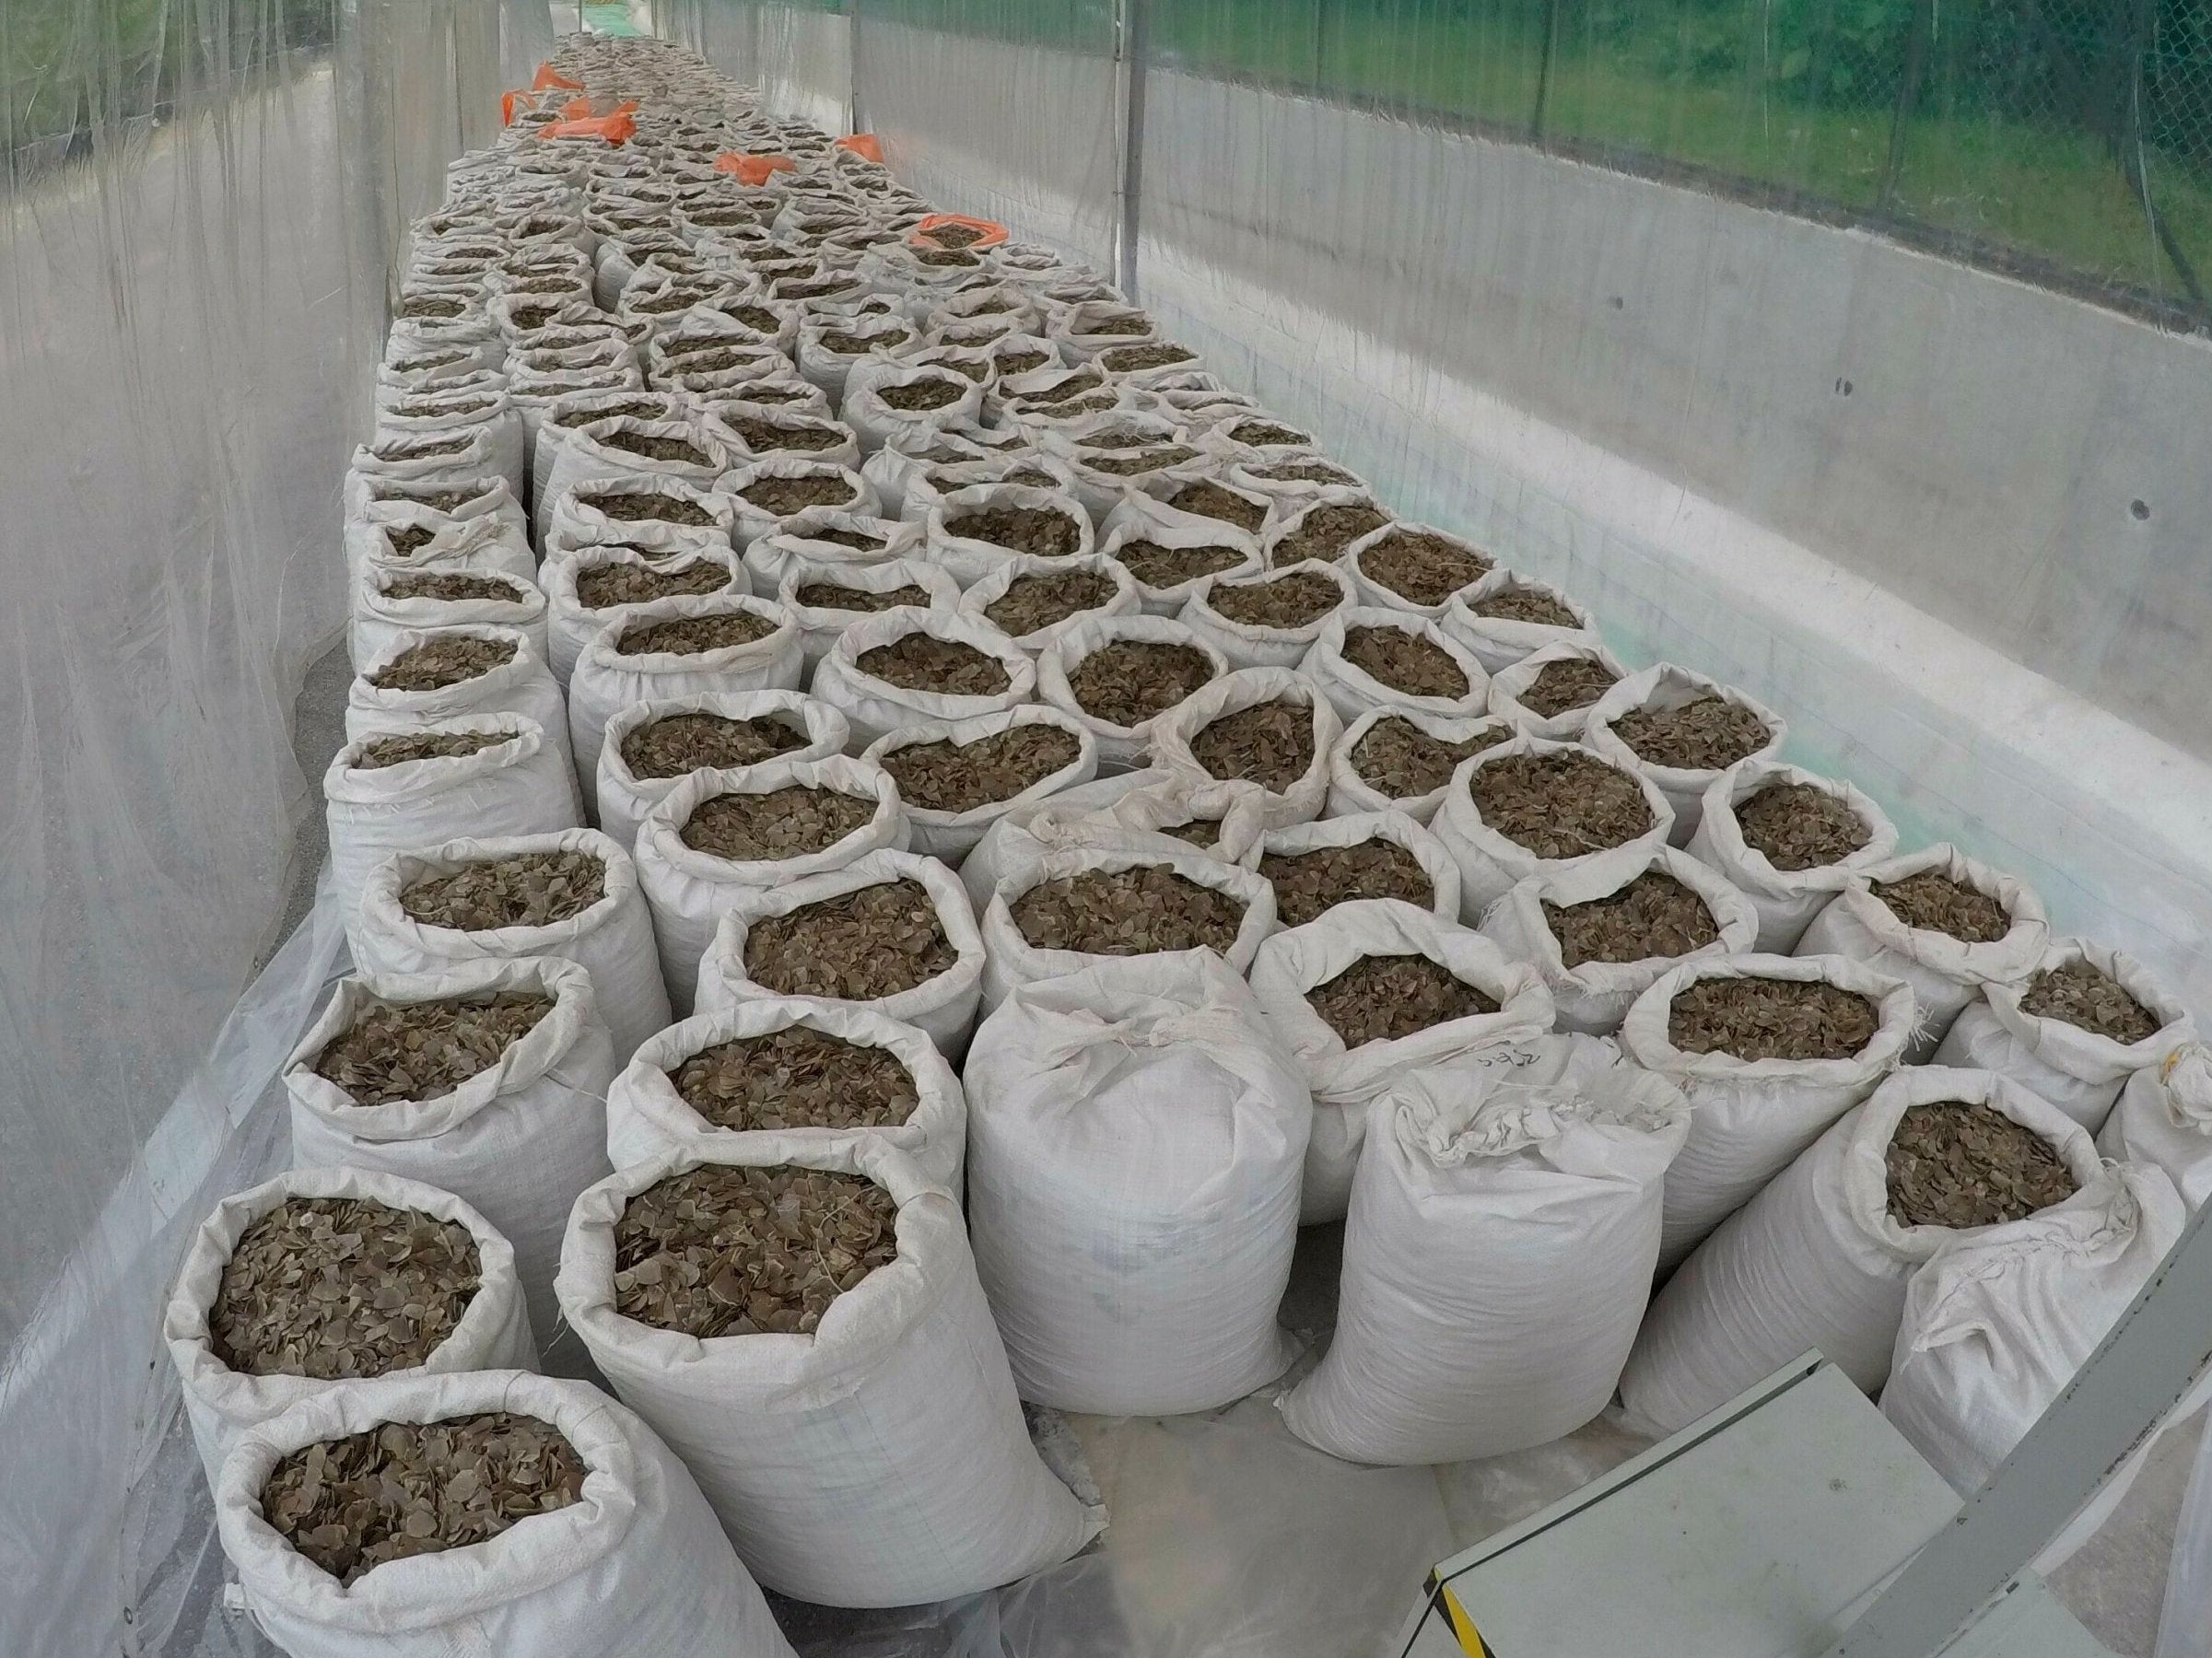 In this 9 April 2019 photo, over 10 tonnes of pangolin scales worth around US$38.1 million are displayed at an undisclosed site in Singapore.